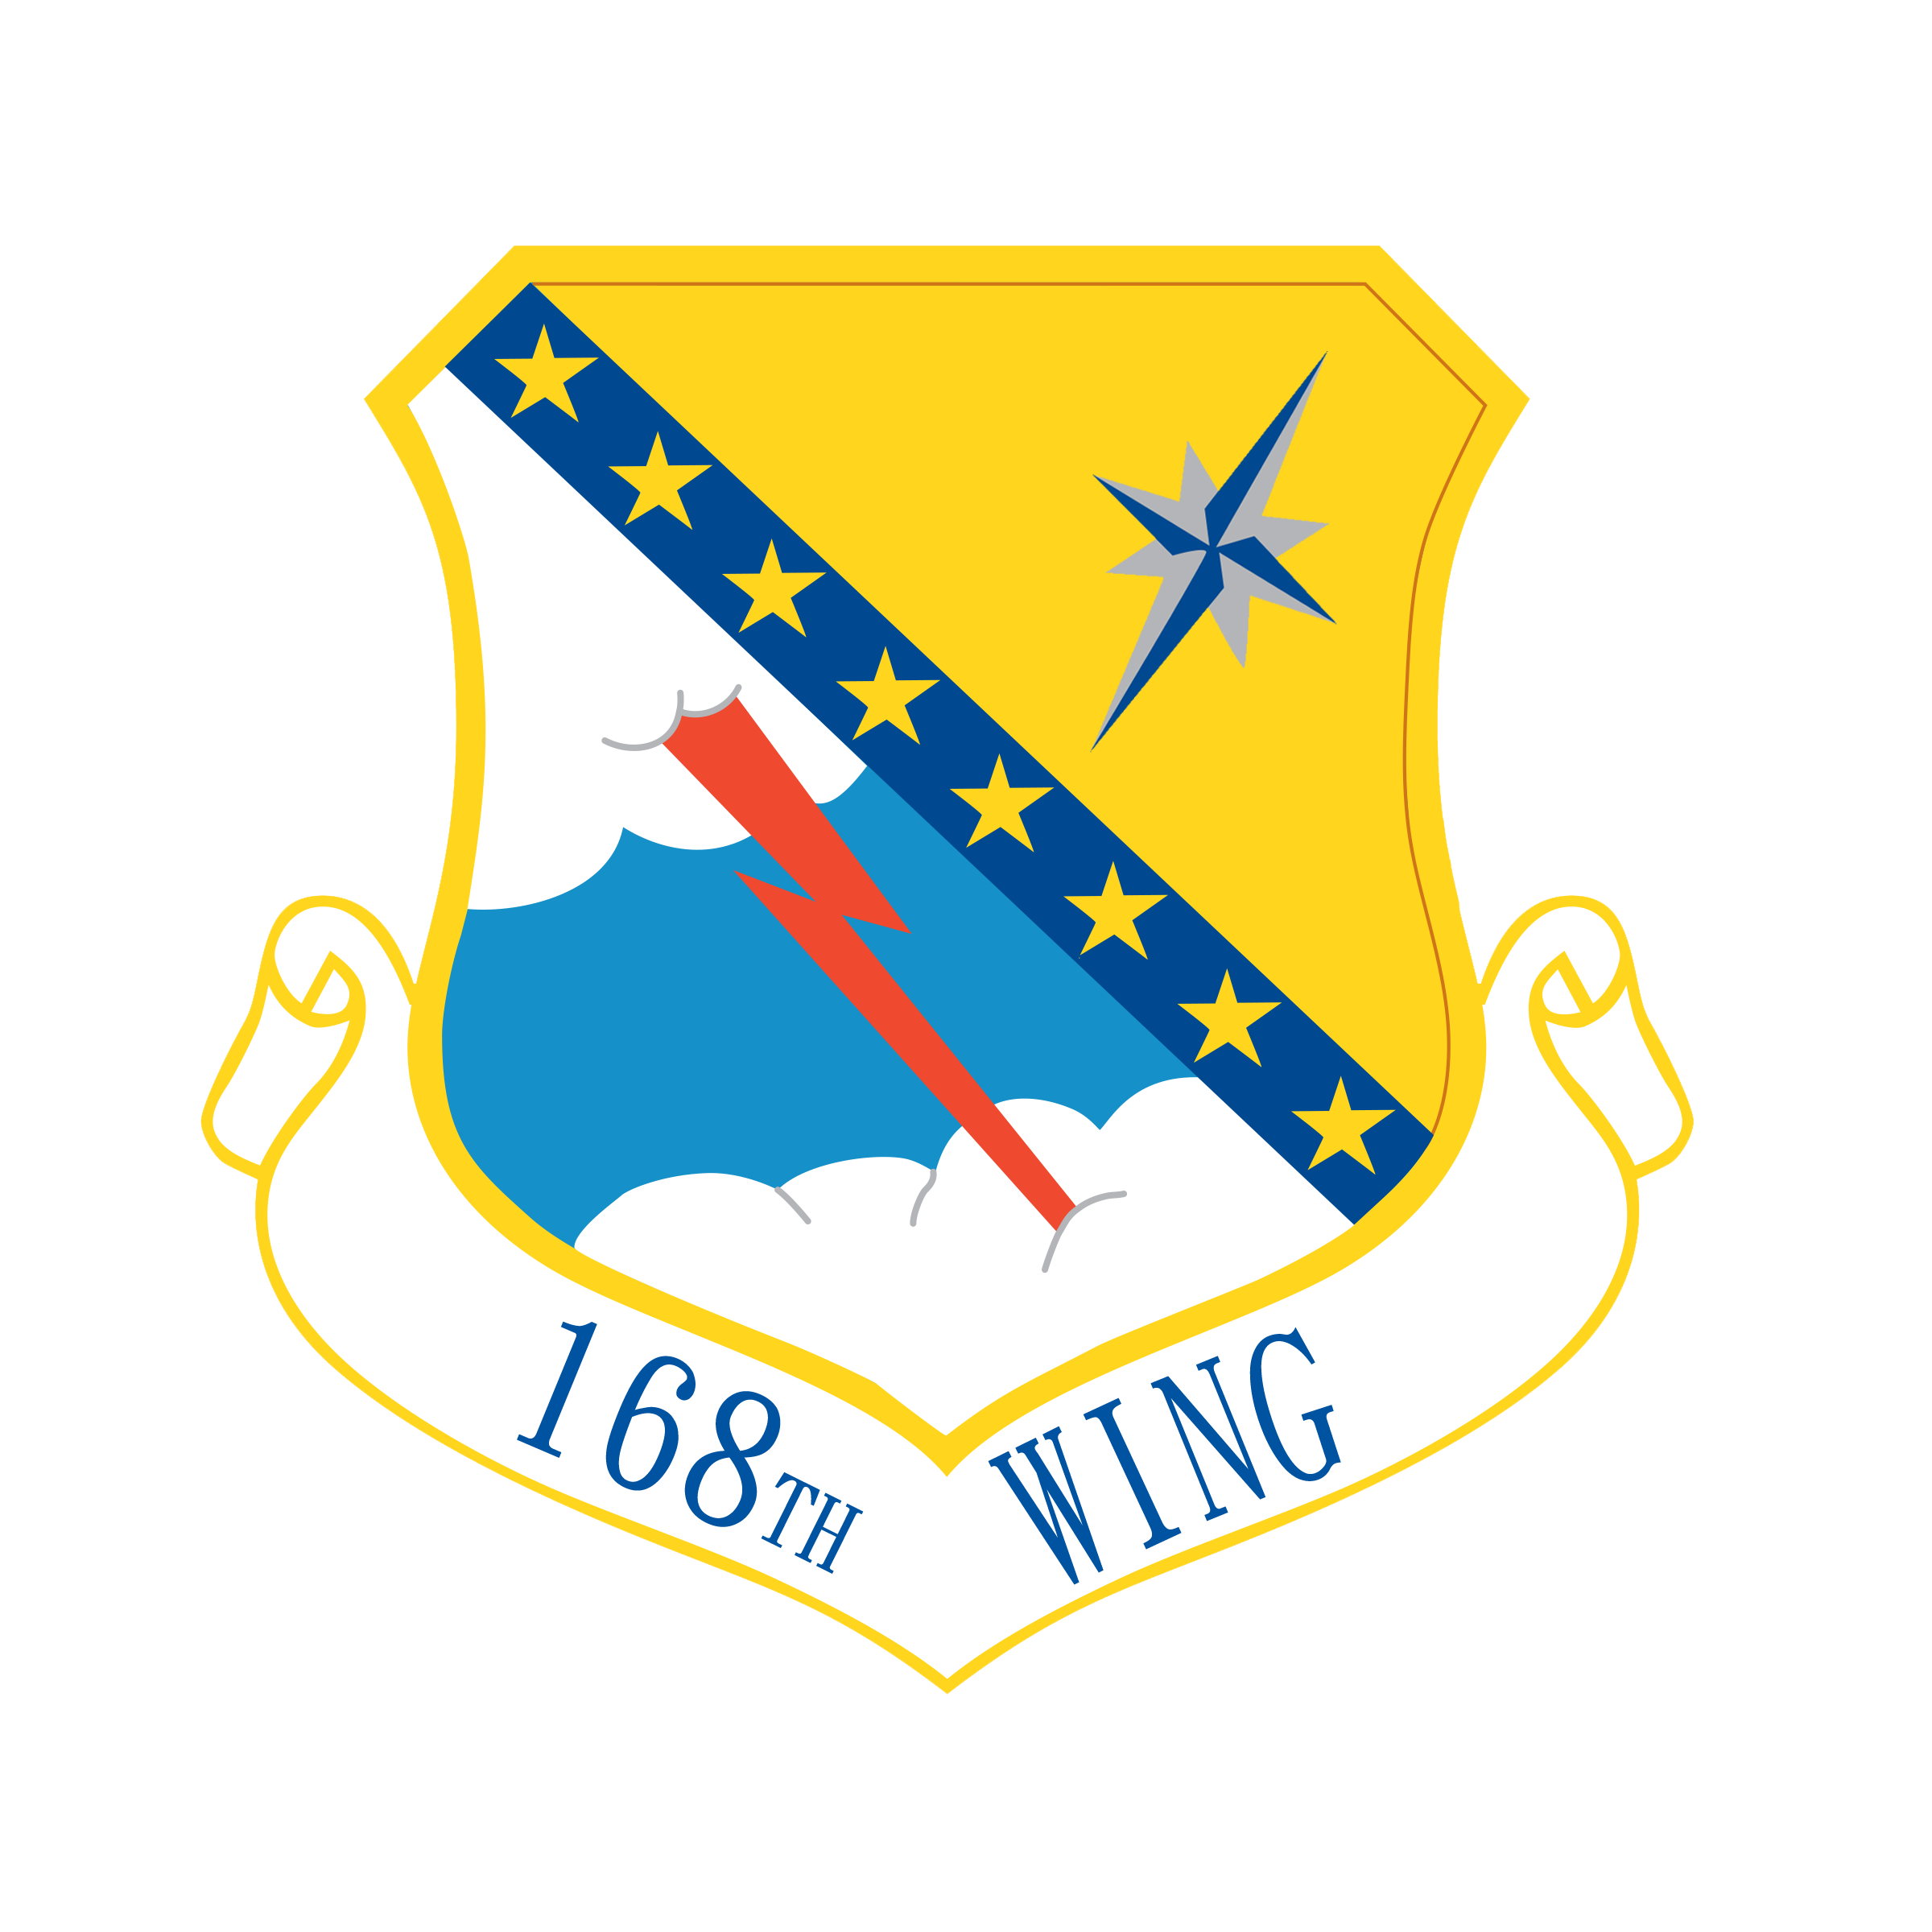 168th Wing